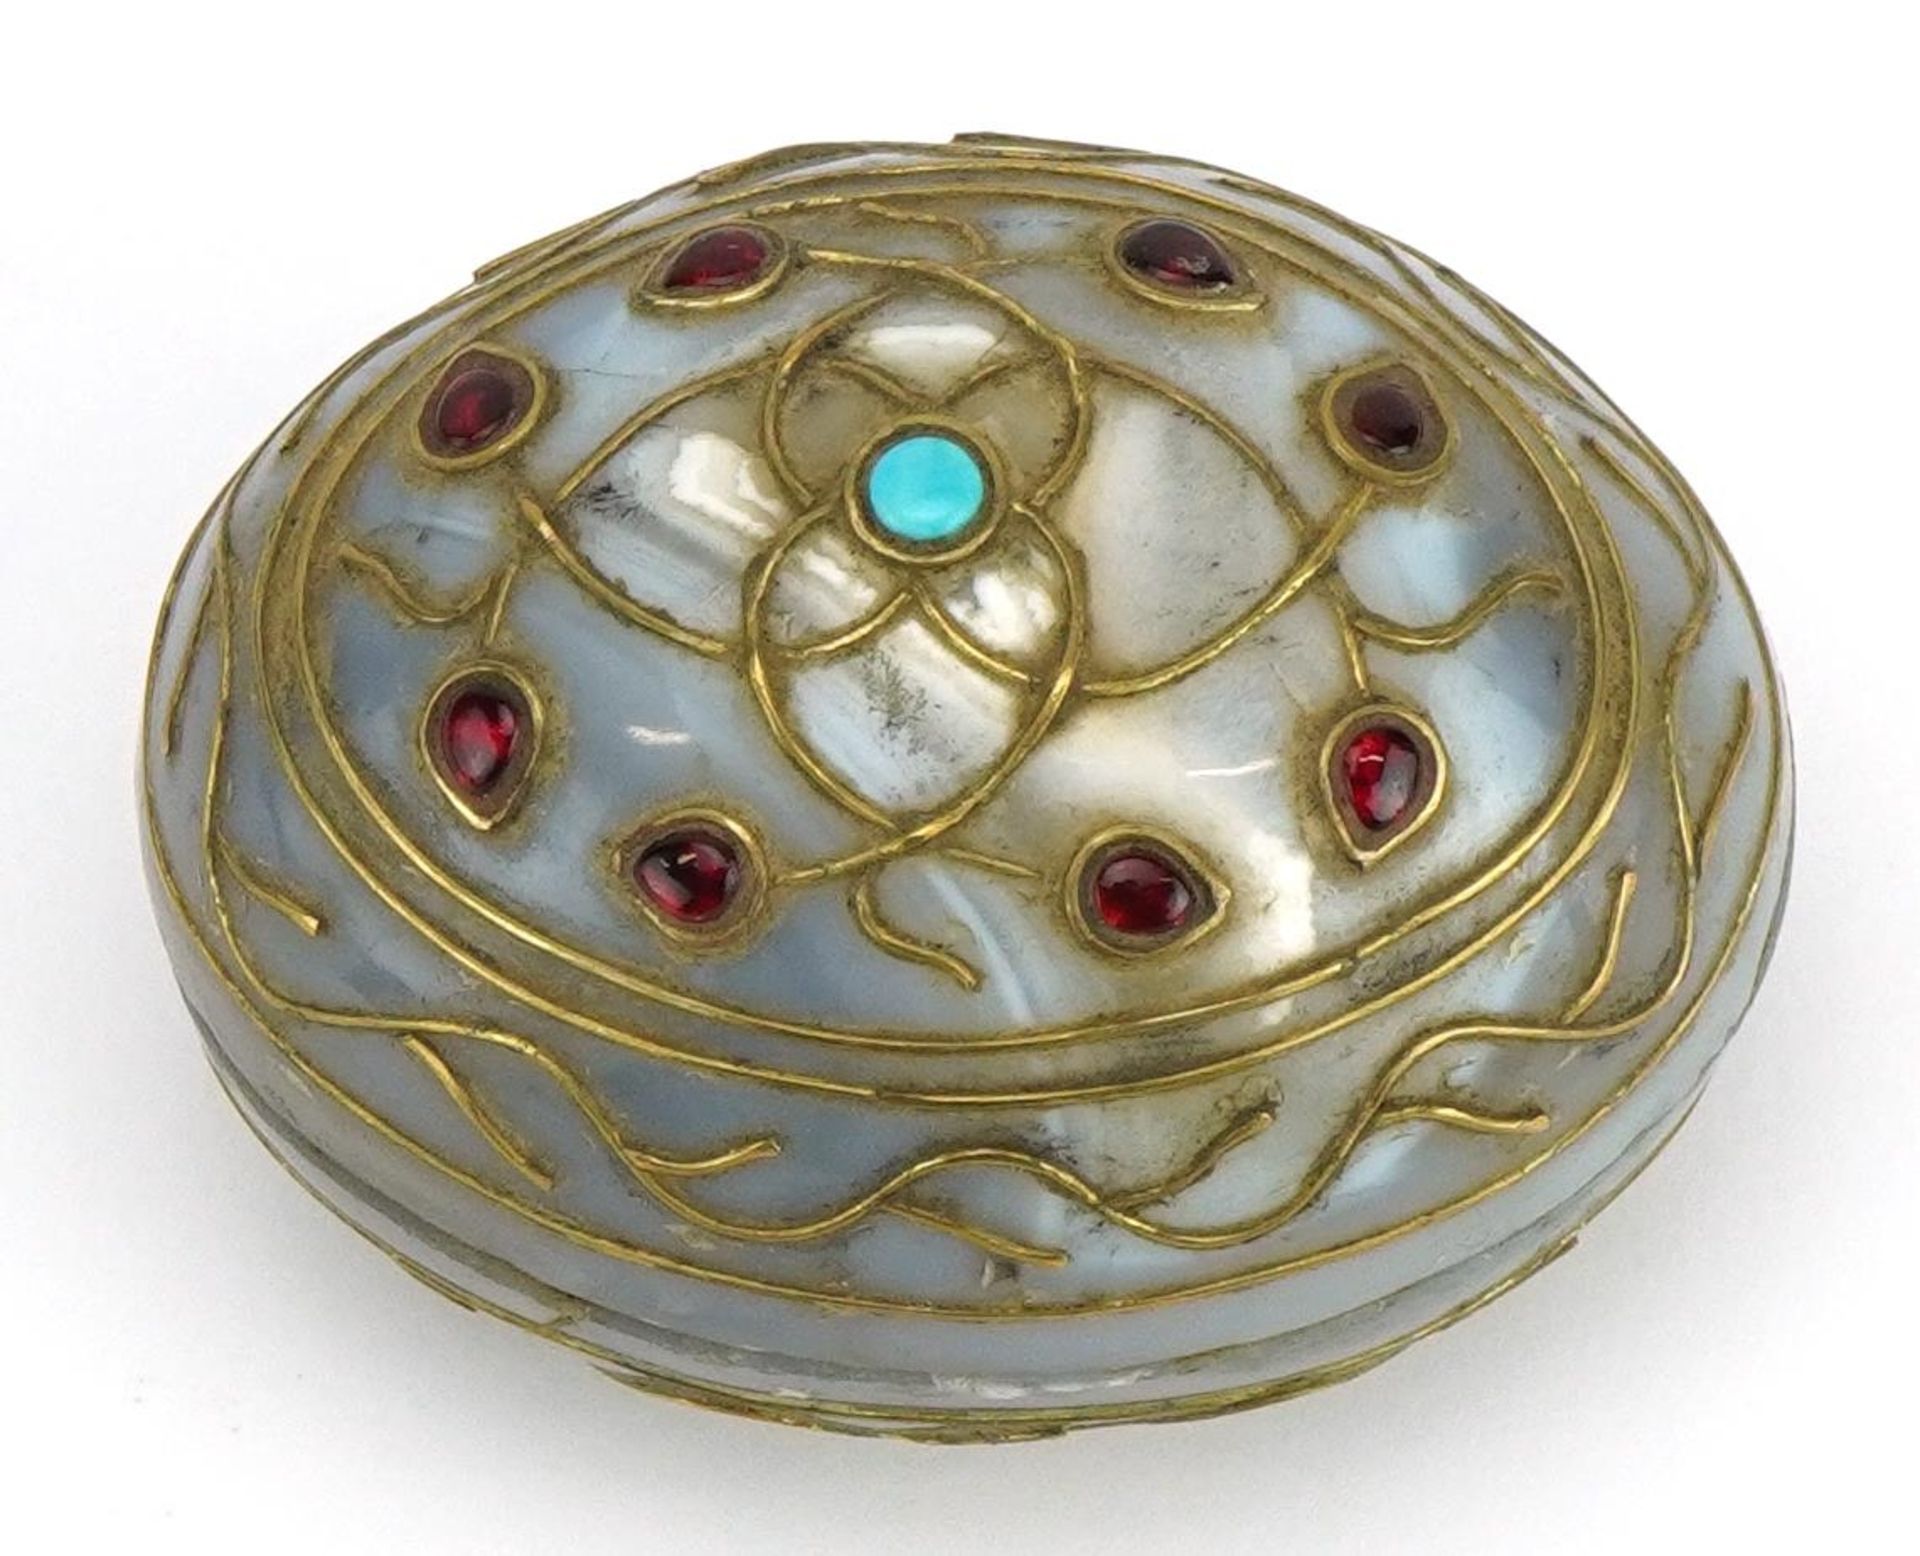 Islamic agate egg shaped box and cover inlaid with stone and metal inlay, 6cm in length - Image 2 of 4